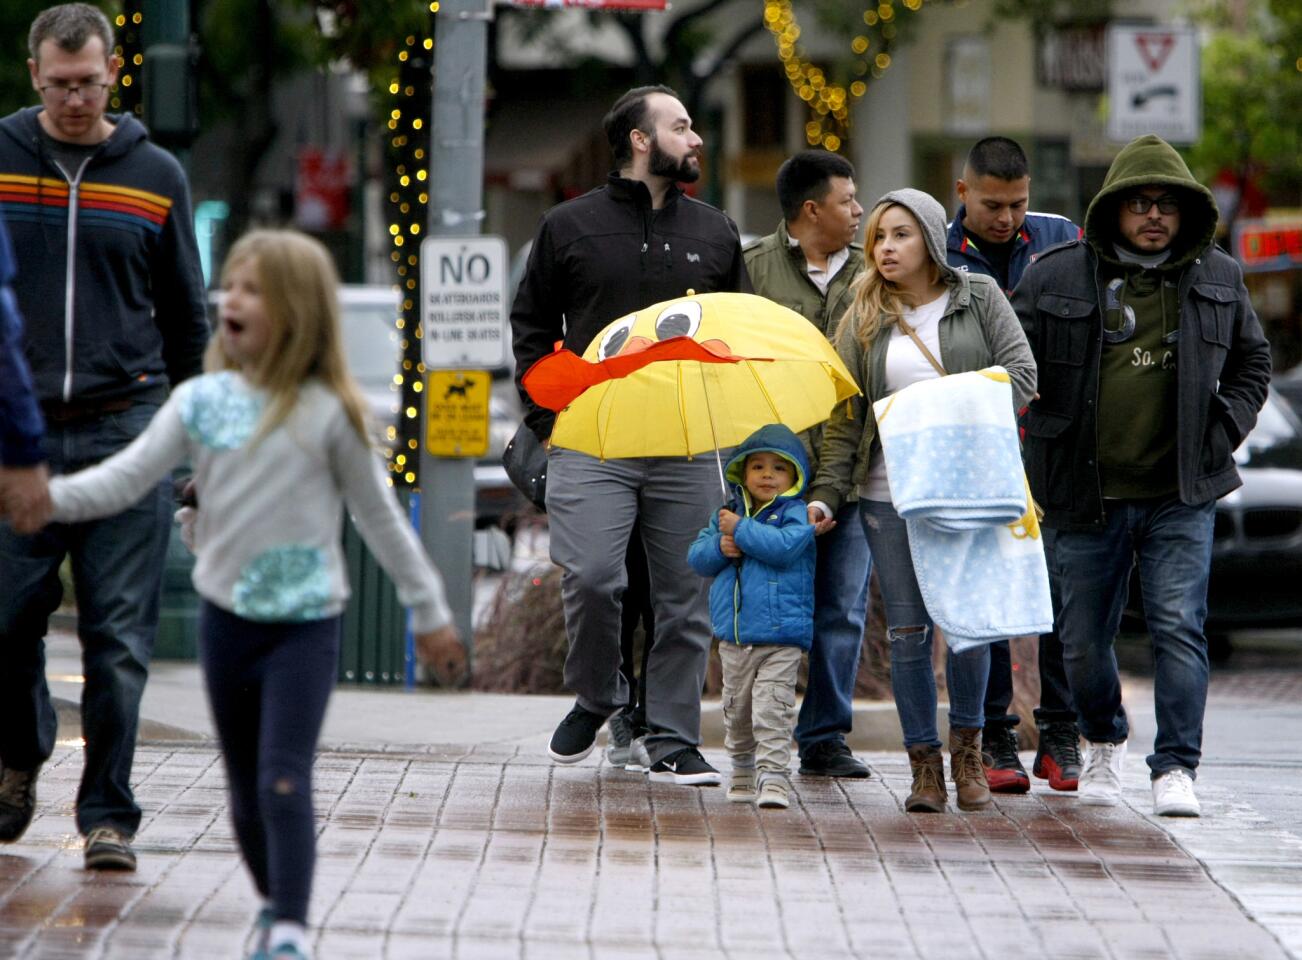 Xander Silva, 3 of Pomona, kept dry with a duck umbrella as he strolled along Honolulu Ave. with his family while rain continued to fall in Montrose on Saturday, Nov. 26, 2016. A strong storm system dropped rain in the area most of the afternoon.